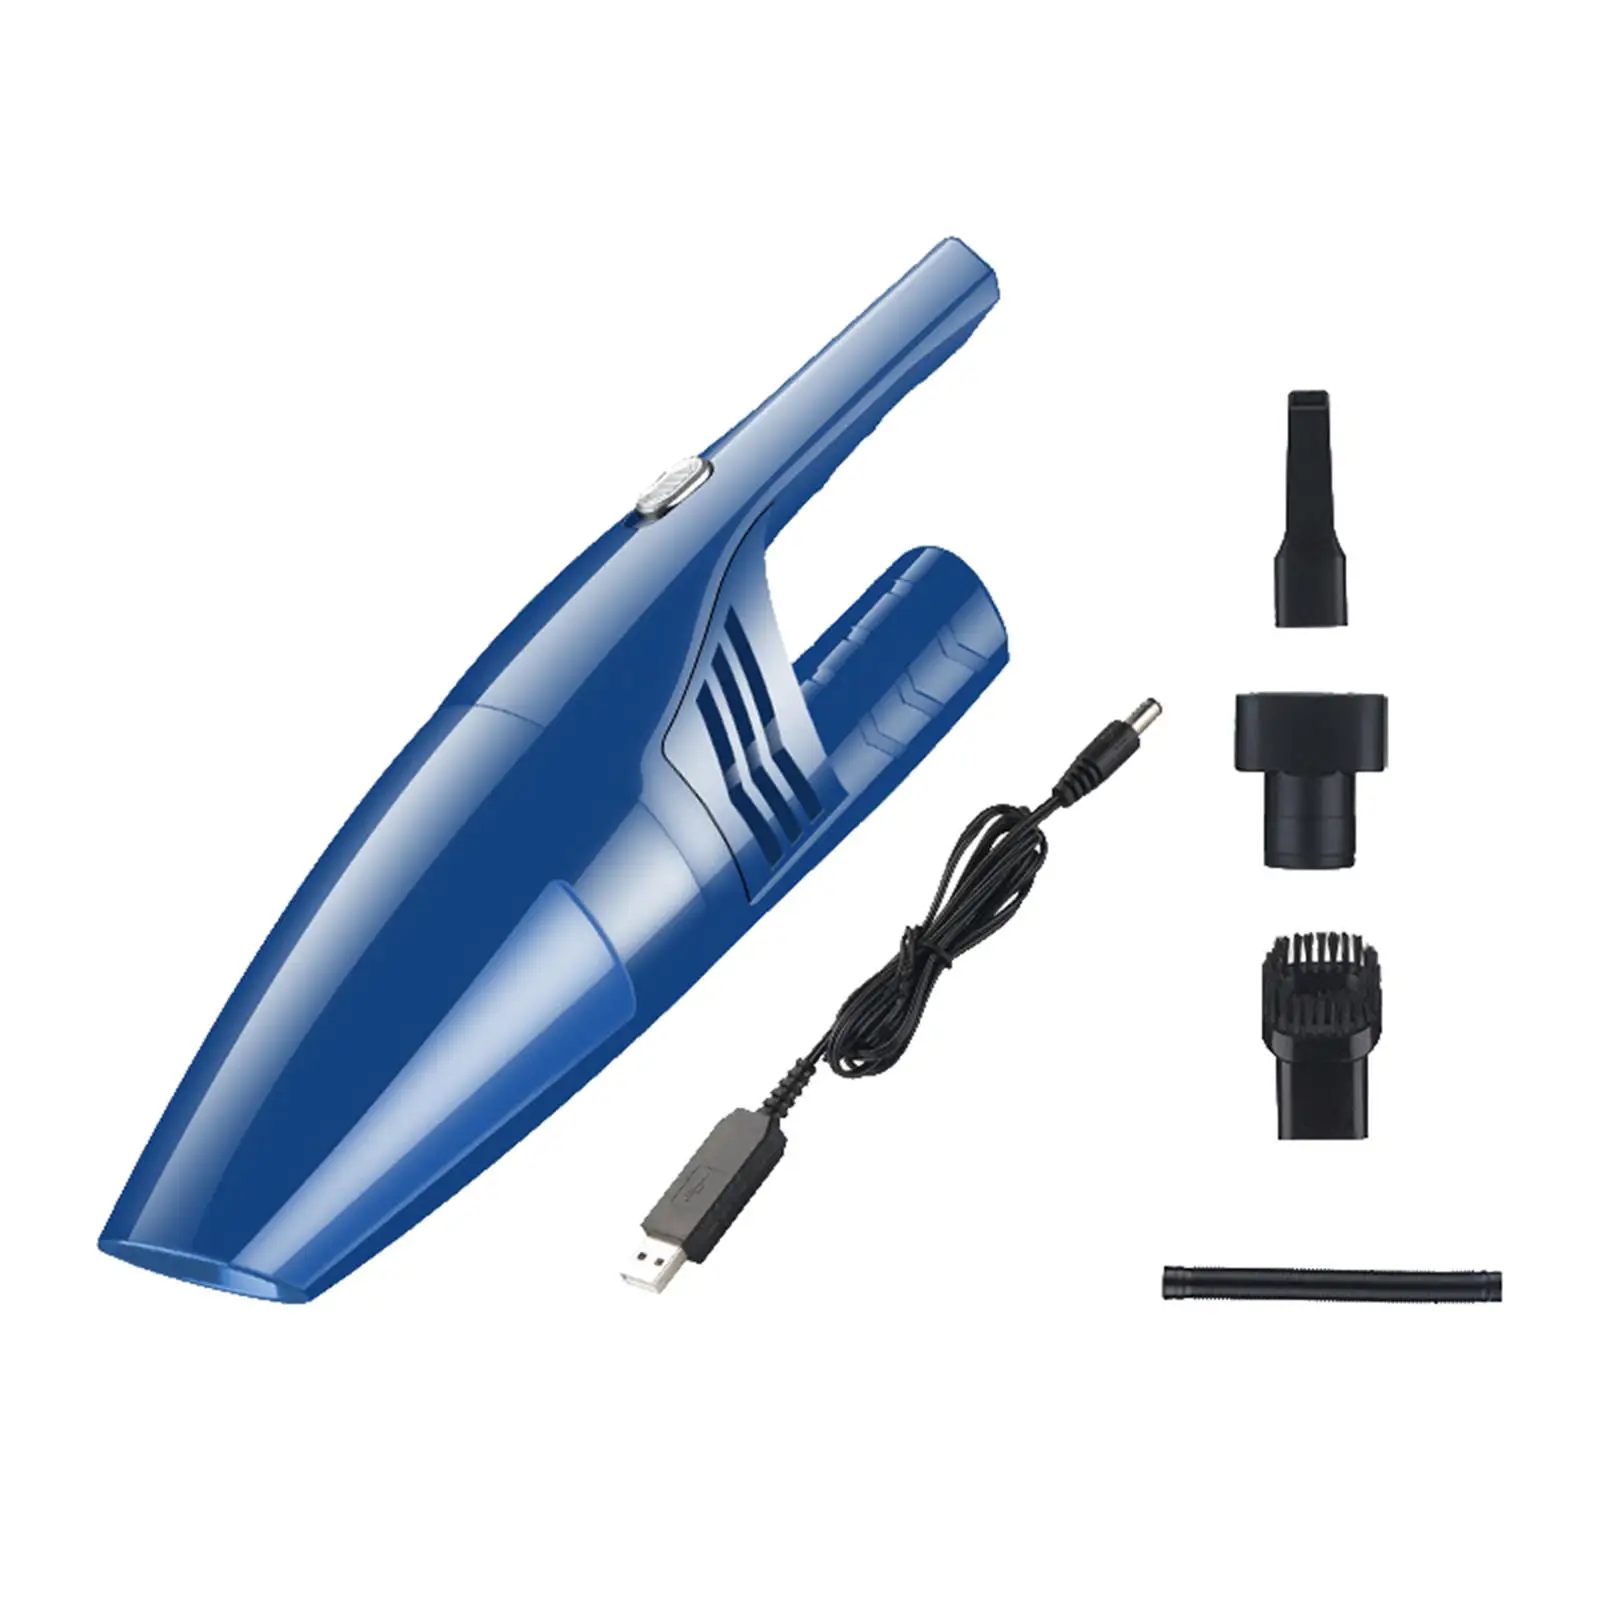 Portable Car Home Vacuum Cleaner 4500PA Office Washable Home 120W Lightweight Small Quick Charge Dust Crevices Strong Suction